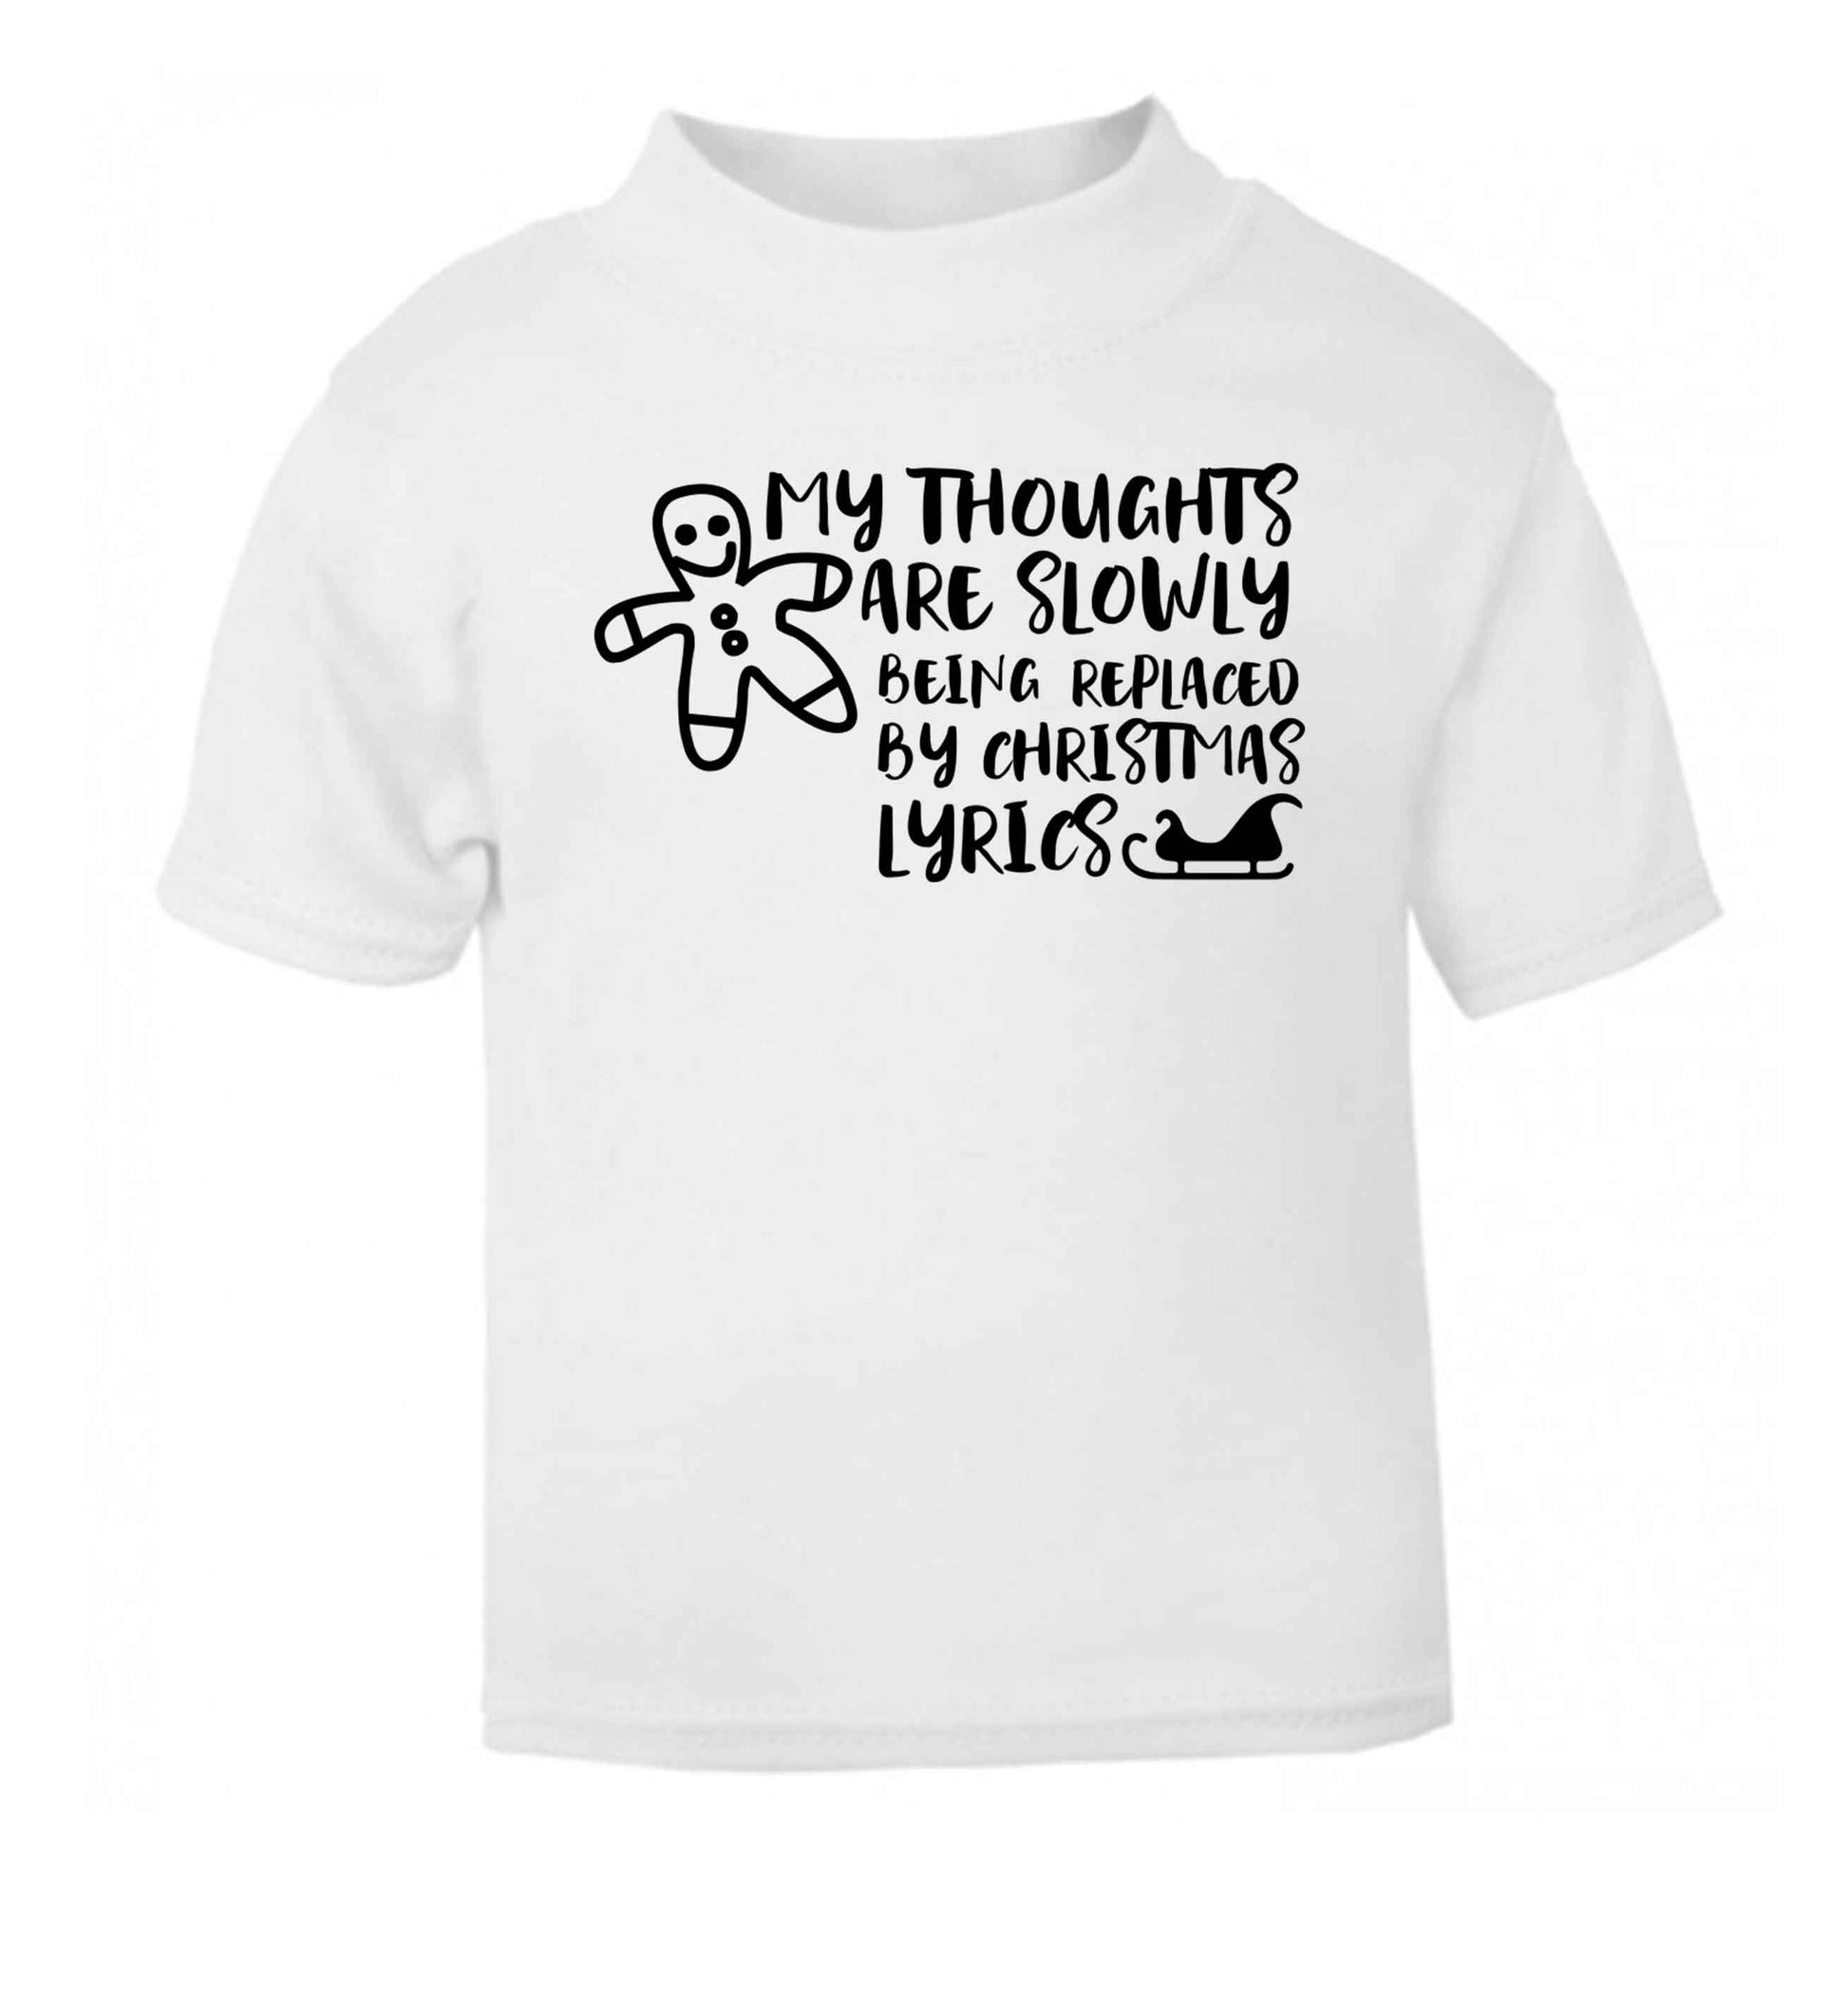 My thoughts are slowly being replaced by Christmas lyrics white Baby Toddler Tshirt 2 Years